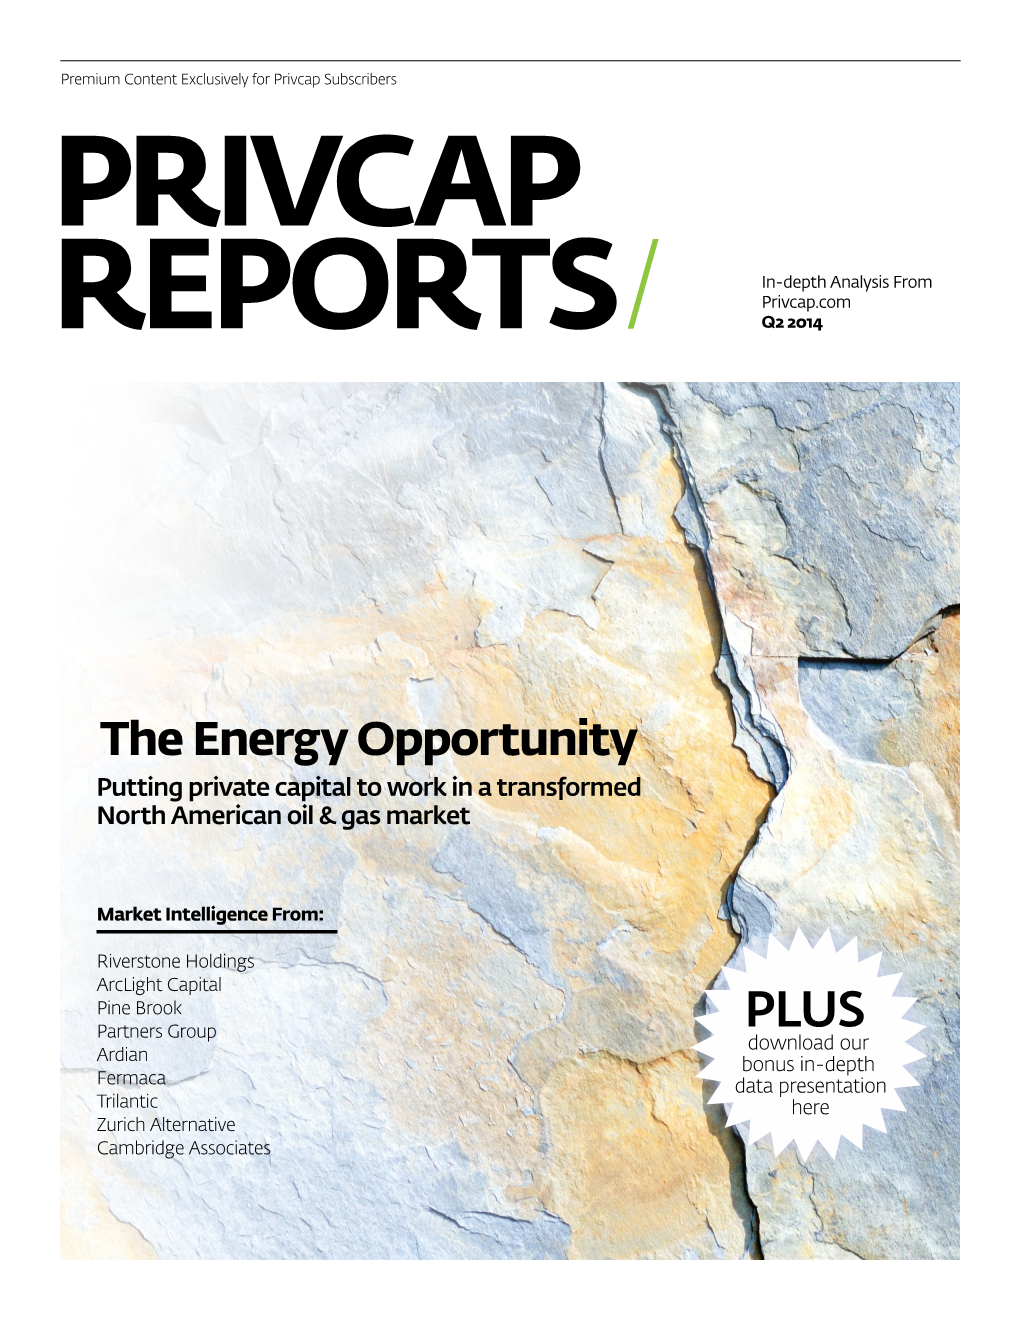 The Energy Opportunity Putting Private Capital to Work in a Transformed North American Oil & Gas Market